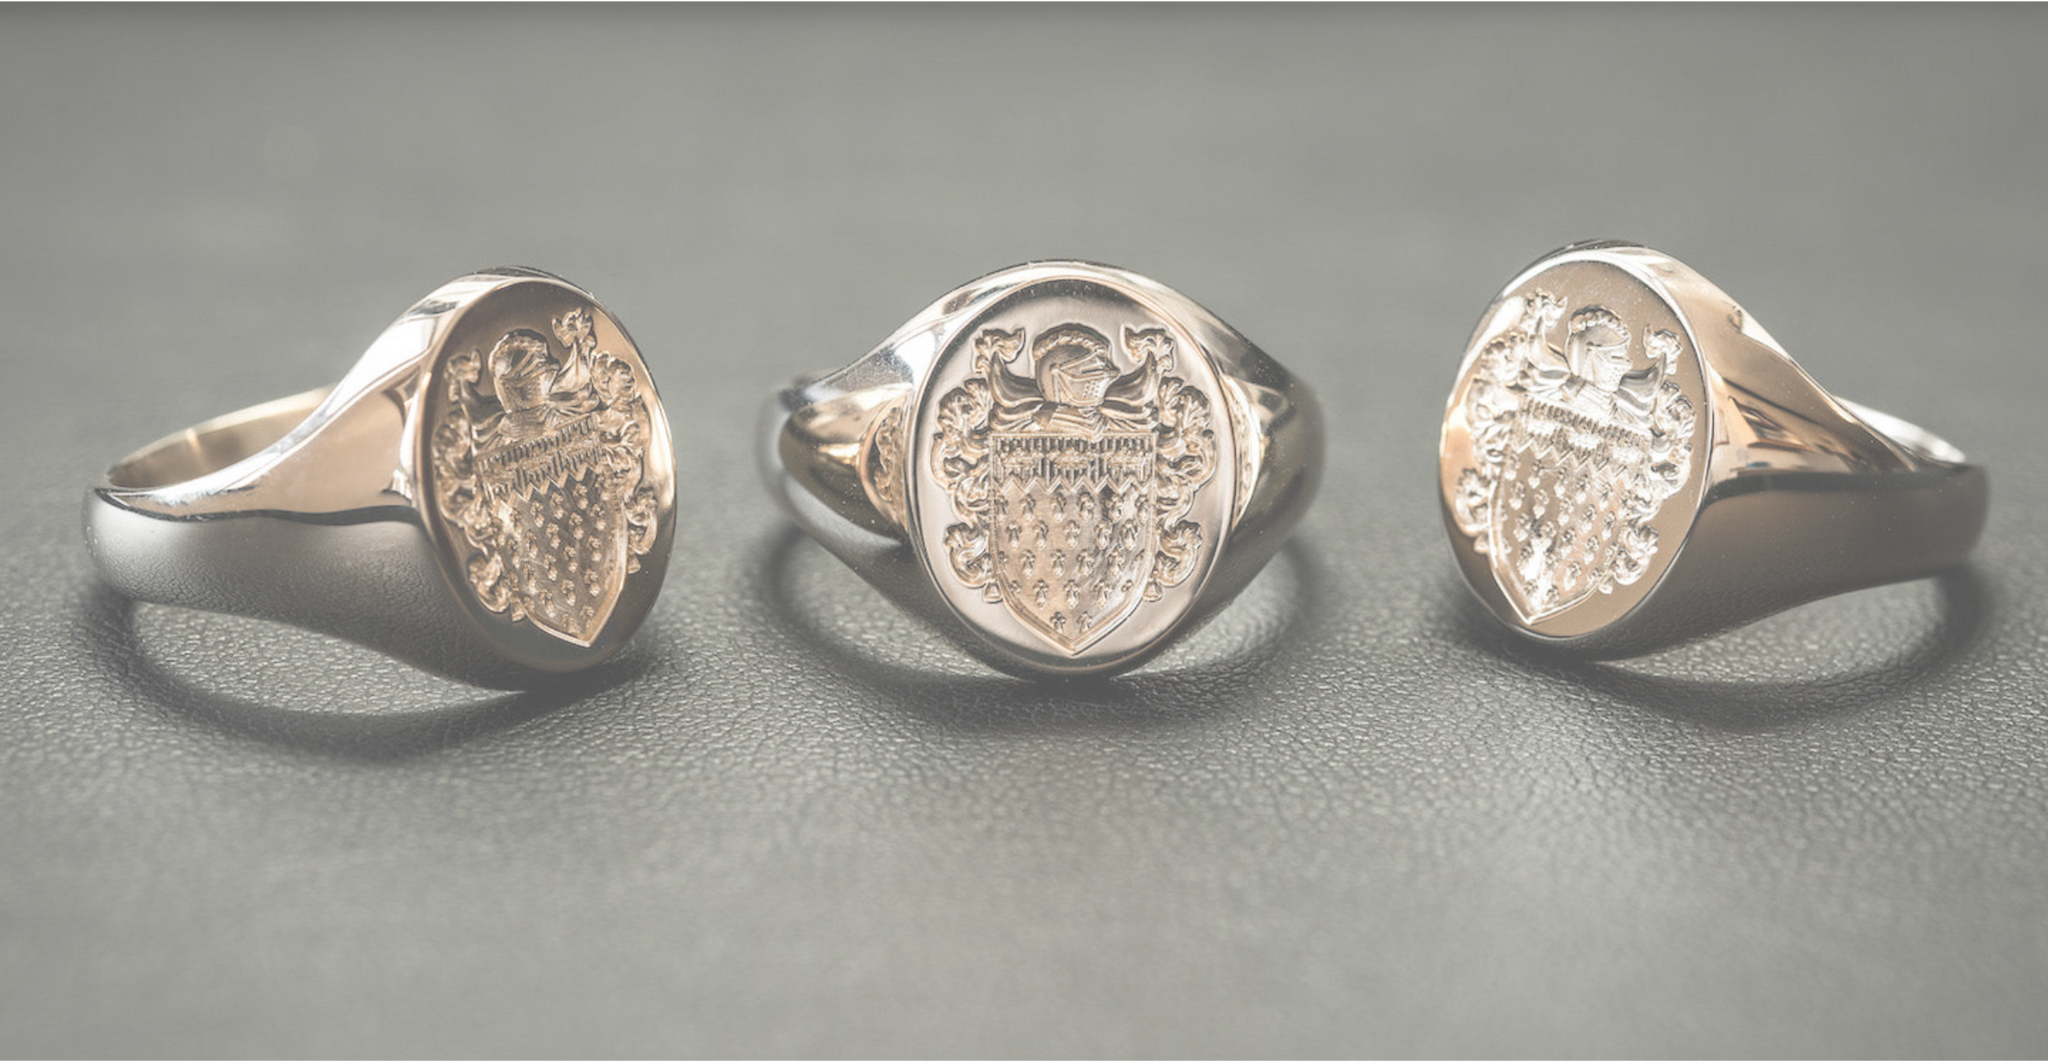 5 interesting facts about Signet rings